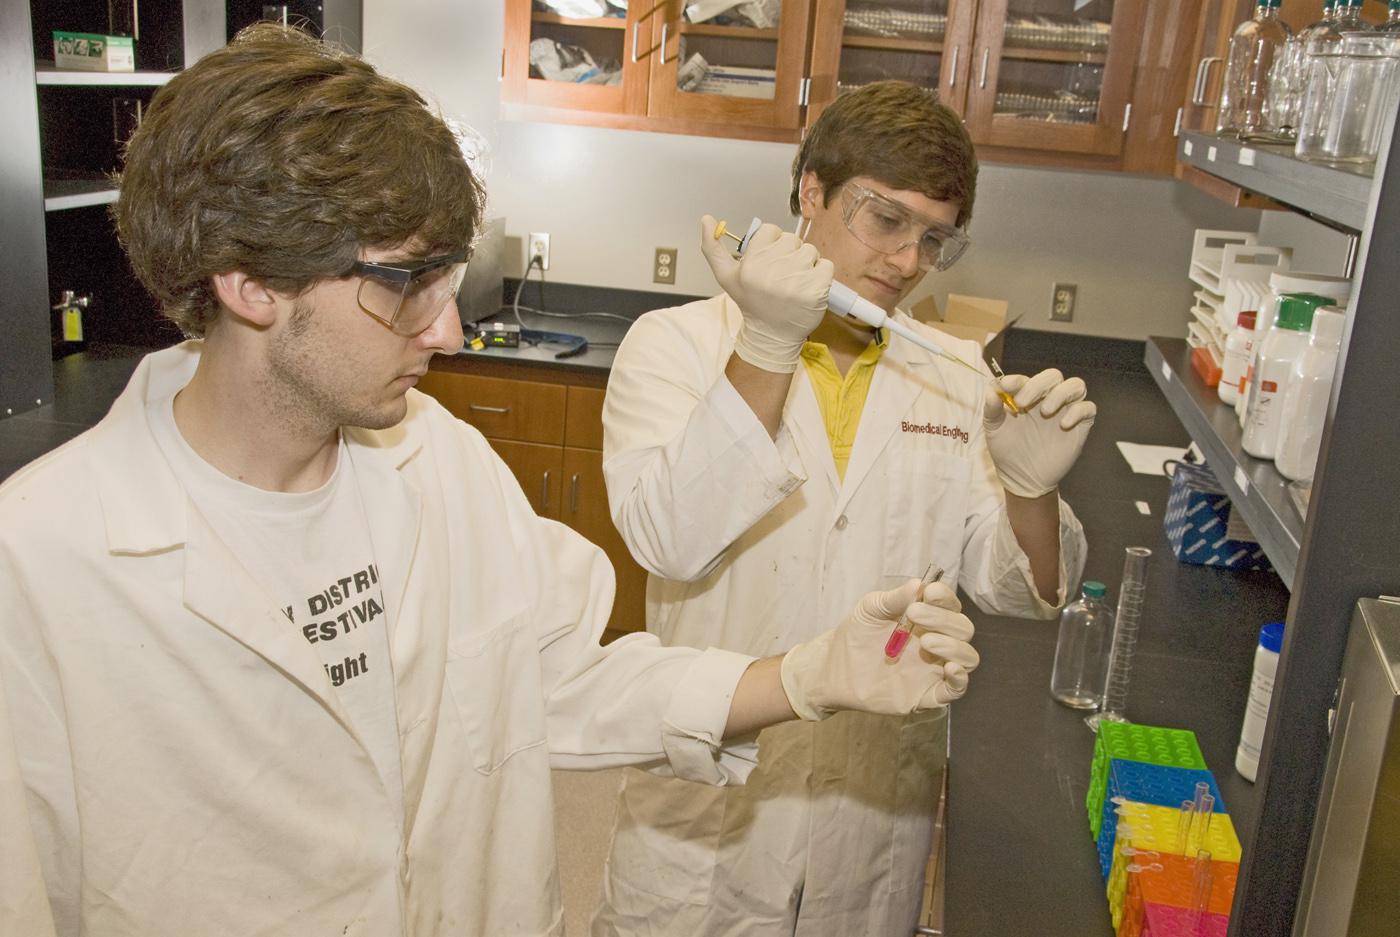 Mississippi State University biological engineering students Sam Pote of Starkville, left, and Caleb Dulaney of Collinsville conduct their research project on isolating an enzyme that initiates lignin breakdown in plant cells. (Photo by Marco Nicovich)